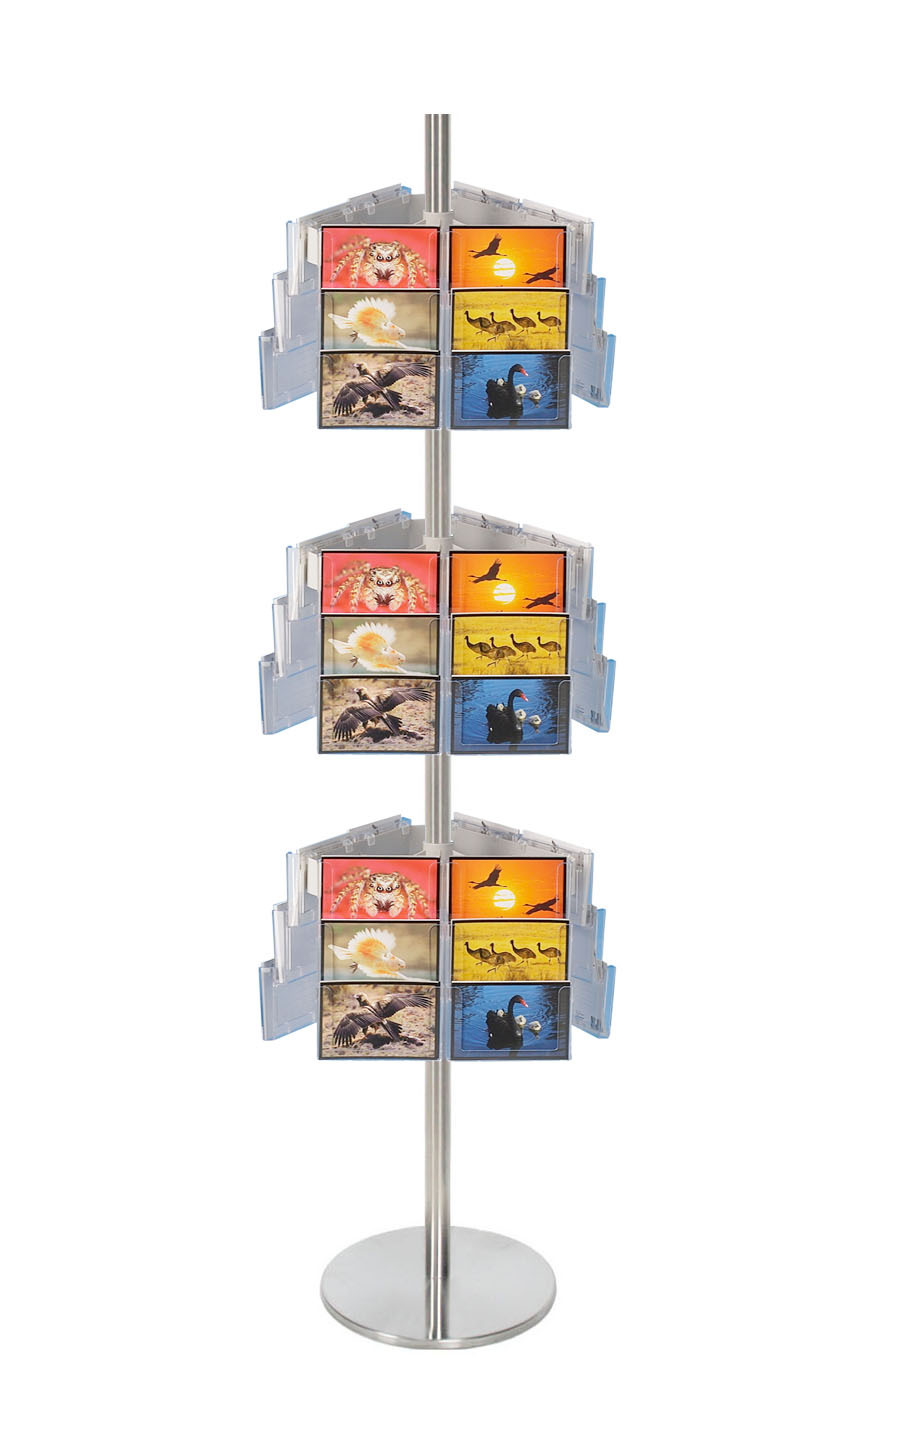 Stainless Steel Carousel Holds Postcards 54 Portrait